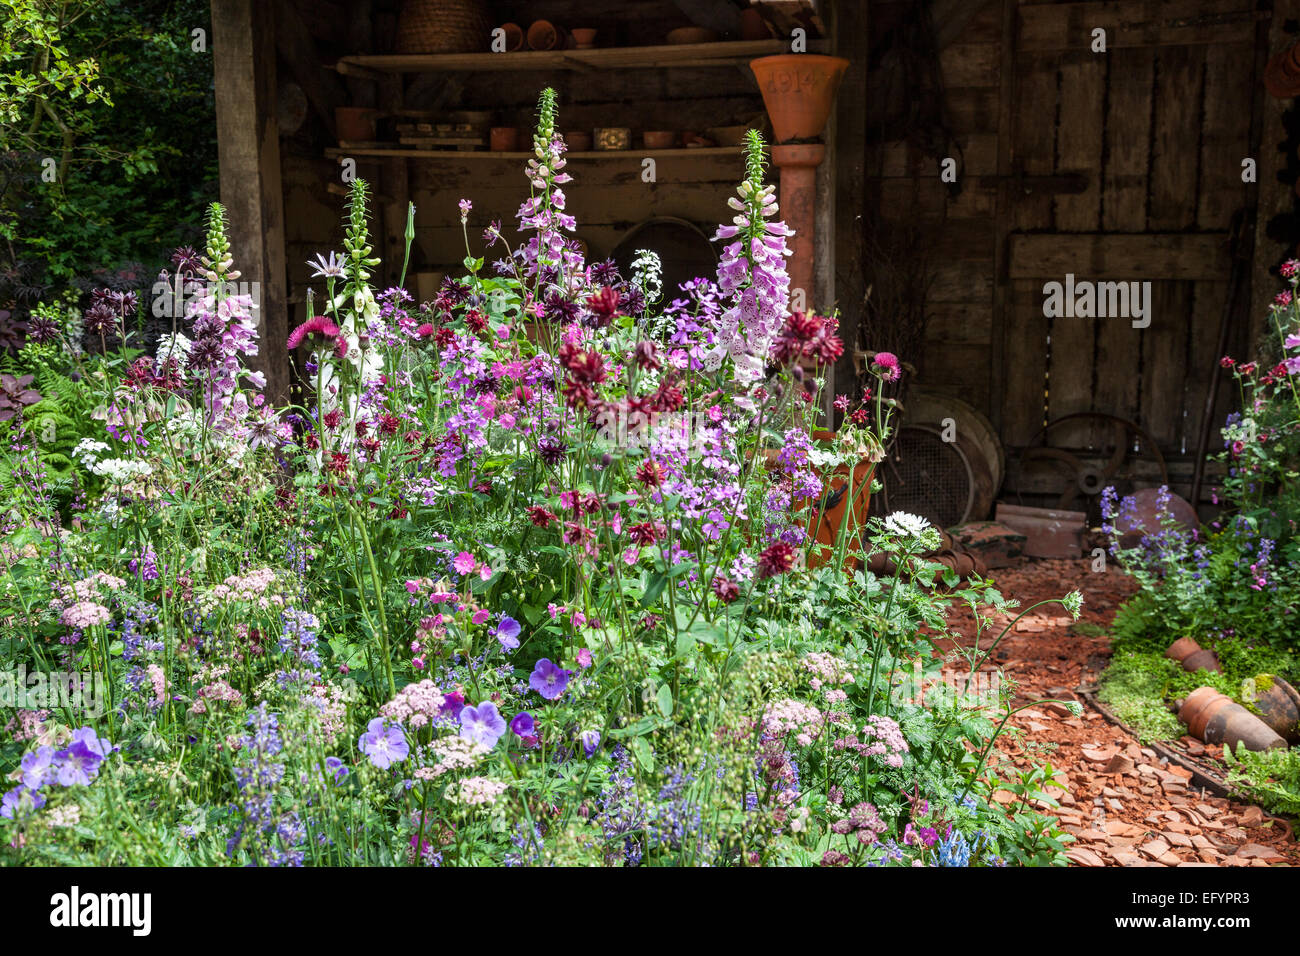 Garden shed with path made of broken terracotta pieces and cottage garden planting - Design: Nature Redesigned, Chelsea Flower Show 2014 Stock Photo